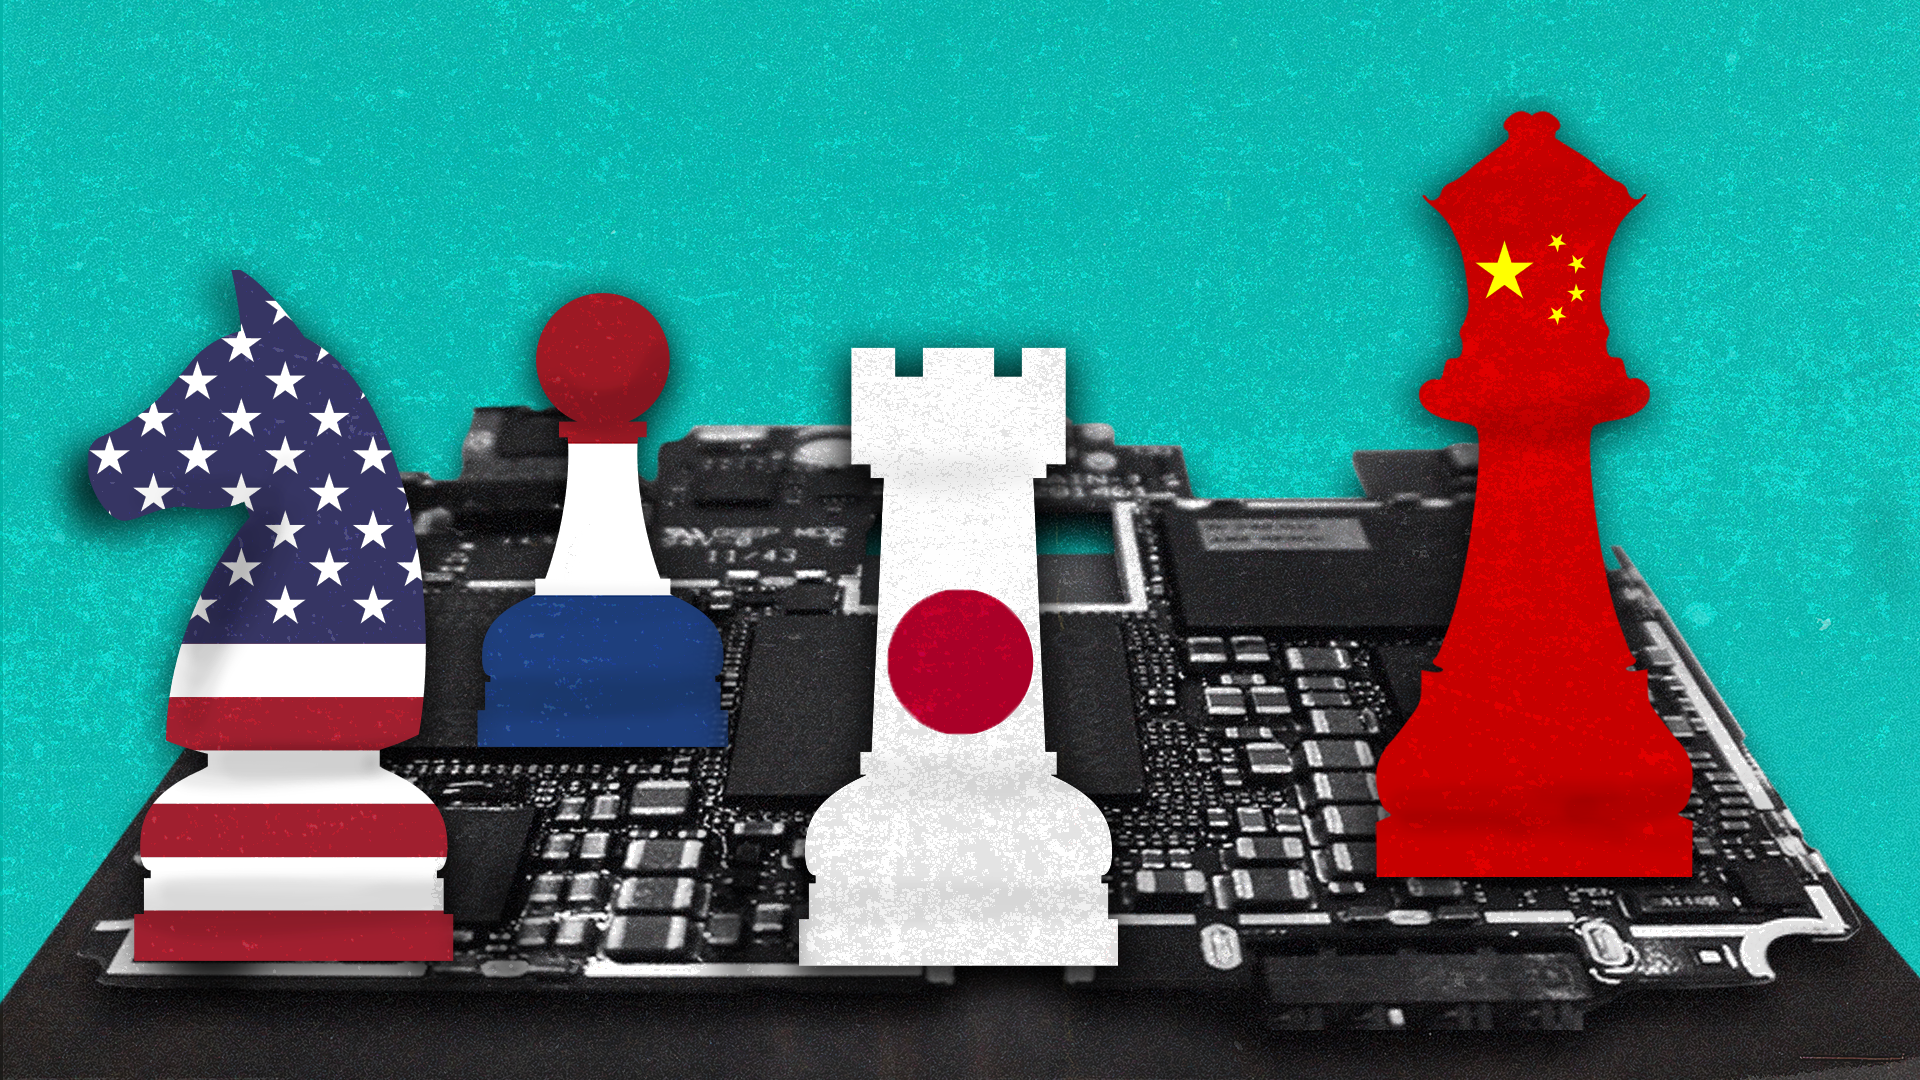 Illustration of chess pieces representing the US, the Netherlands, Japan, and China on a chessboard made of semiconductors